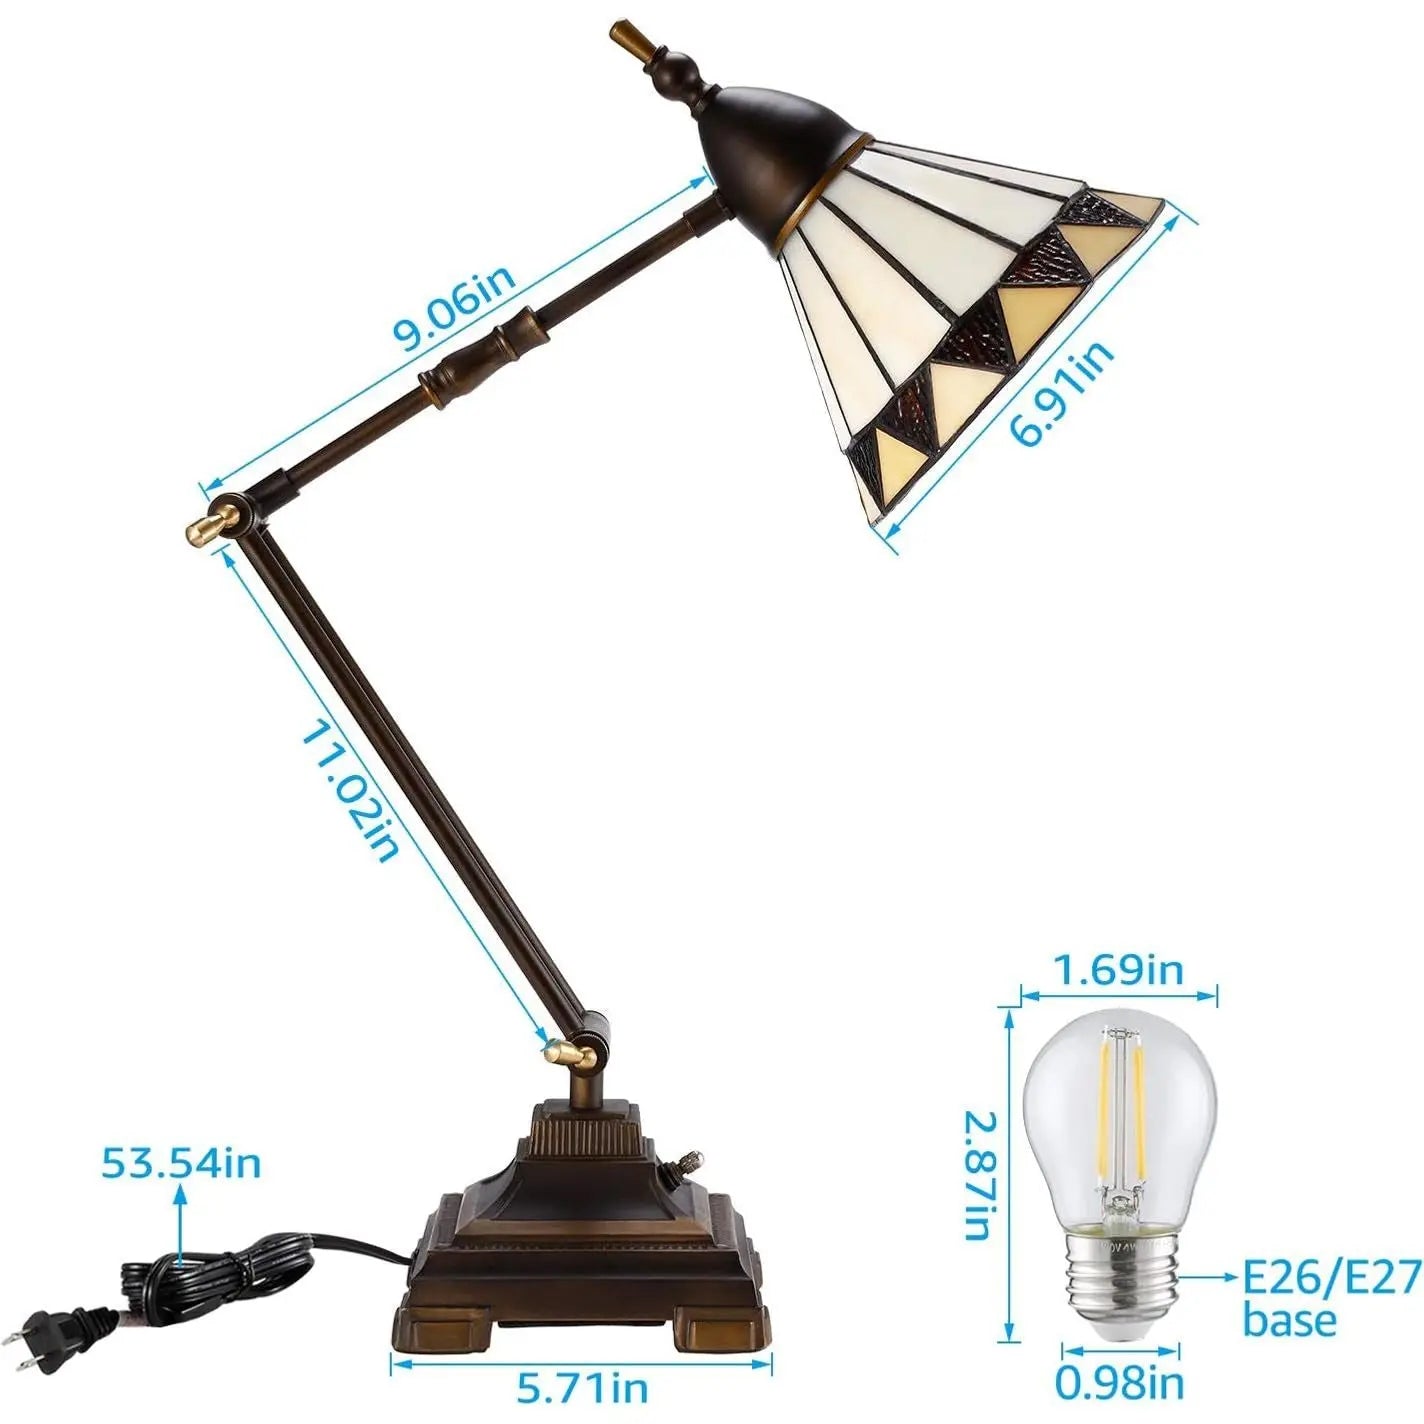 Tiffany Style Table Lamp, Antique Vintage Light Decor Swing Arm Desk Light, Handmade Lampshade, LED G45 Bulb Included, Decoration for Living Rooms, Bedrooms, Coffee Bar